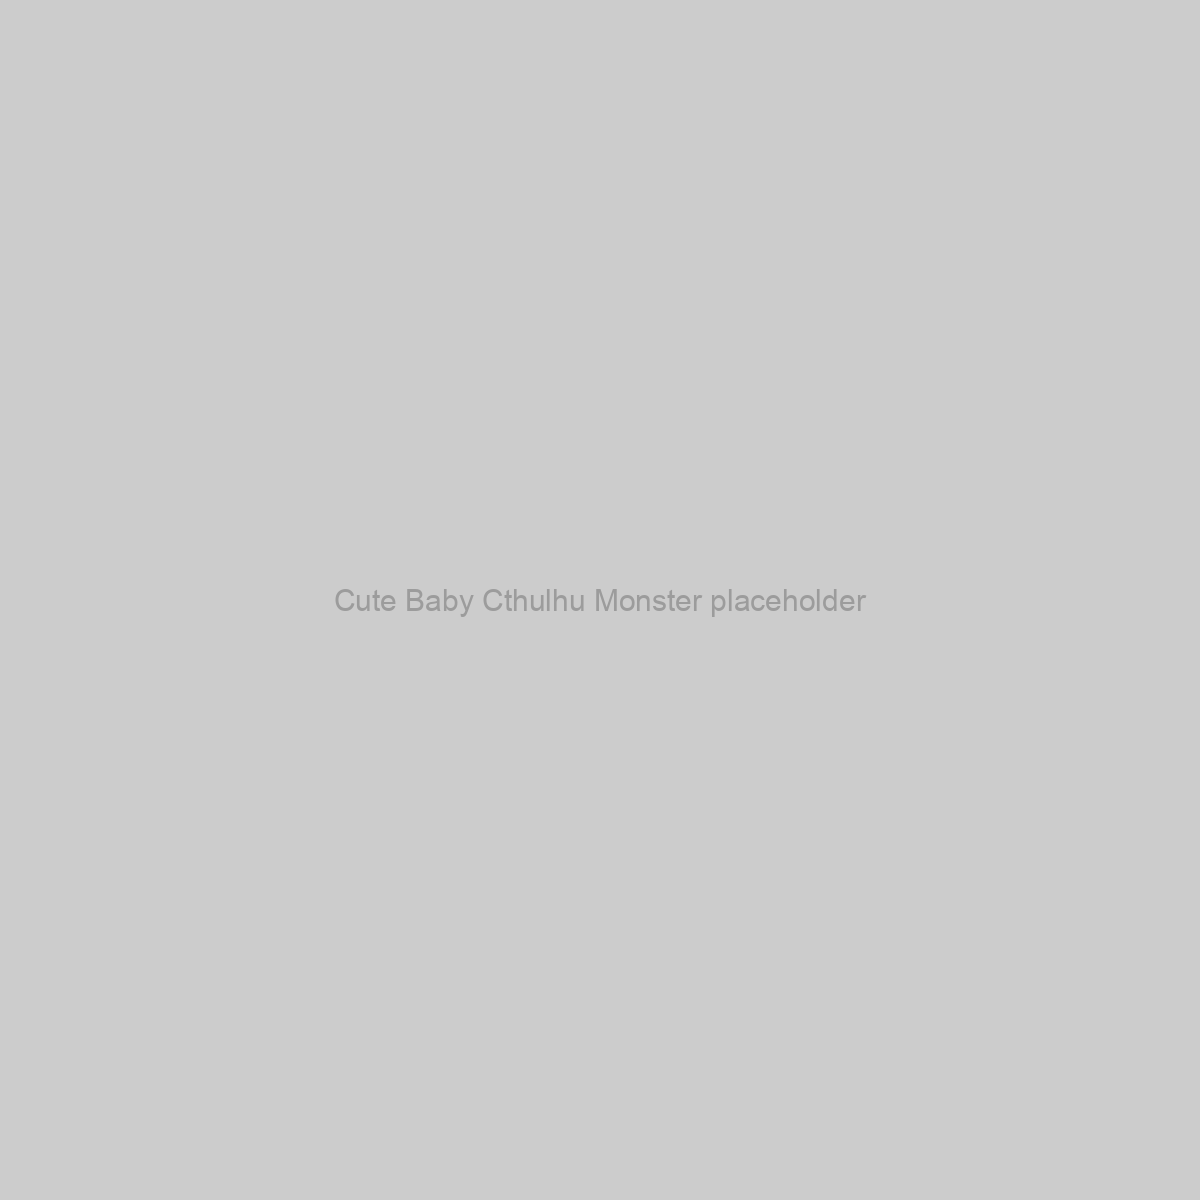 Cute Baby Cthulhu Monster Placeholder Image